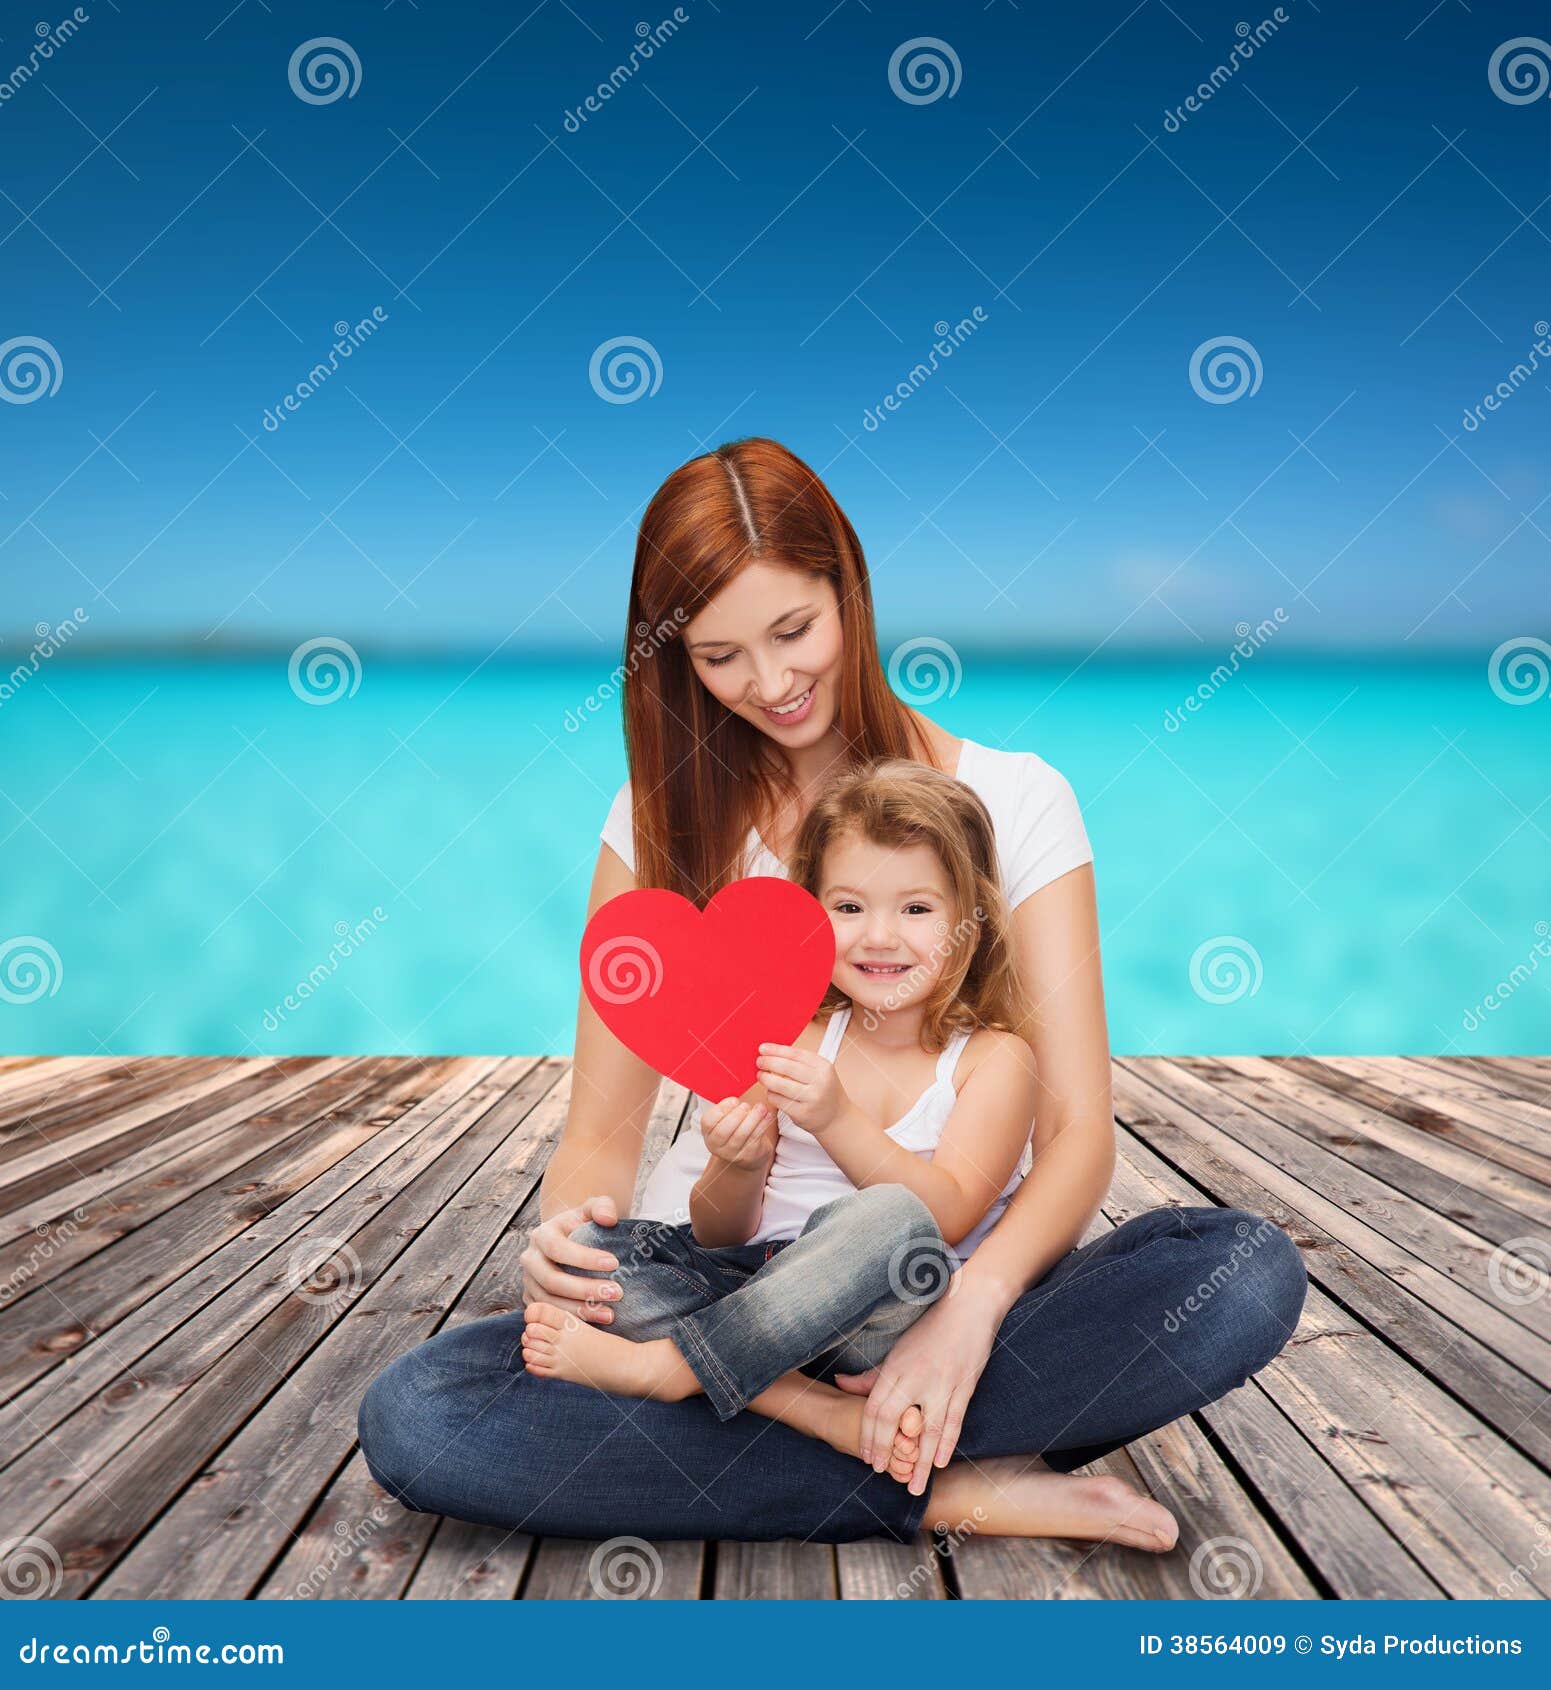 Happy mother with adorable little girl and heart. Childhood, parenting and relationship concept - happy mother with adorable little girl and red heart